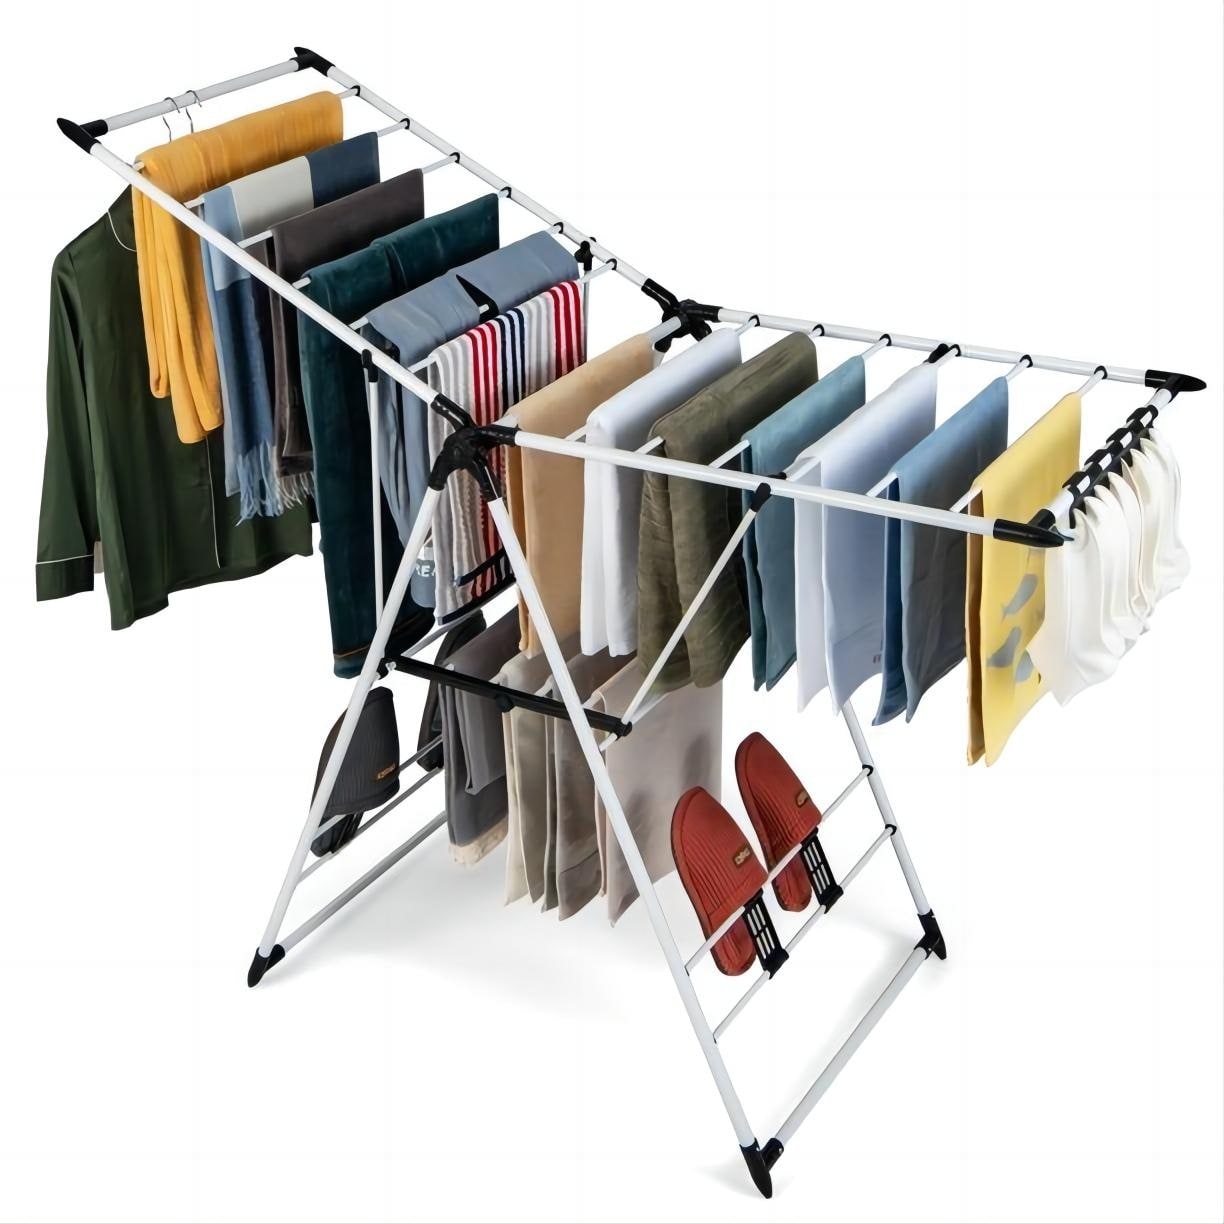 https://ak1.ostkcdn.com/images/products/is/images/direct/69a91534ee78a9c20f057e82167d0ba704a415d9/Two-layer-folding-drying-rack%2C-no-assembly%2C-adjustable-height.jpg